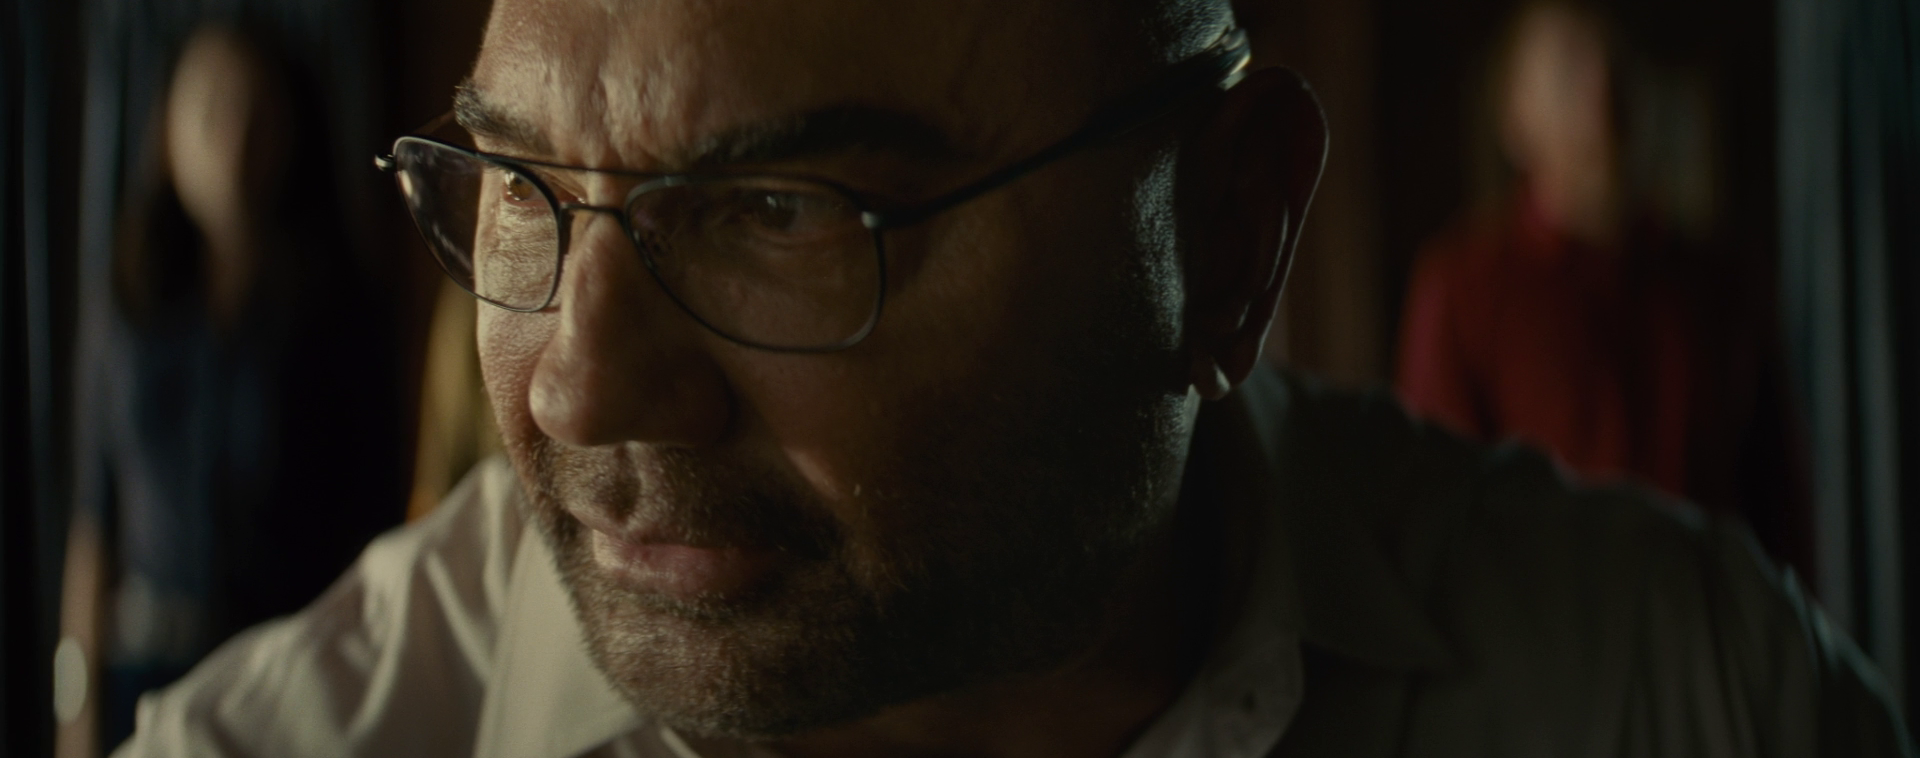 Dave Bautista - Knock at the Cabin ©Universal Pictures International France